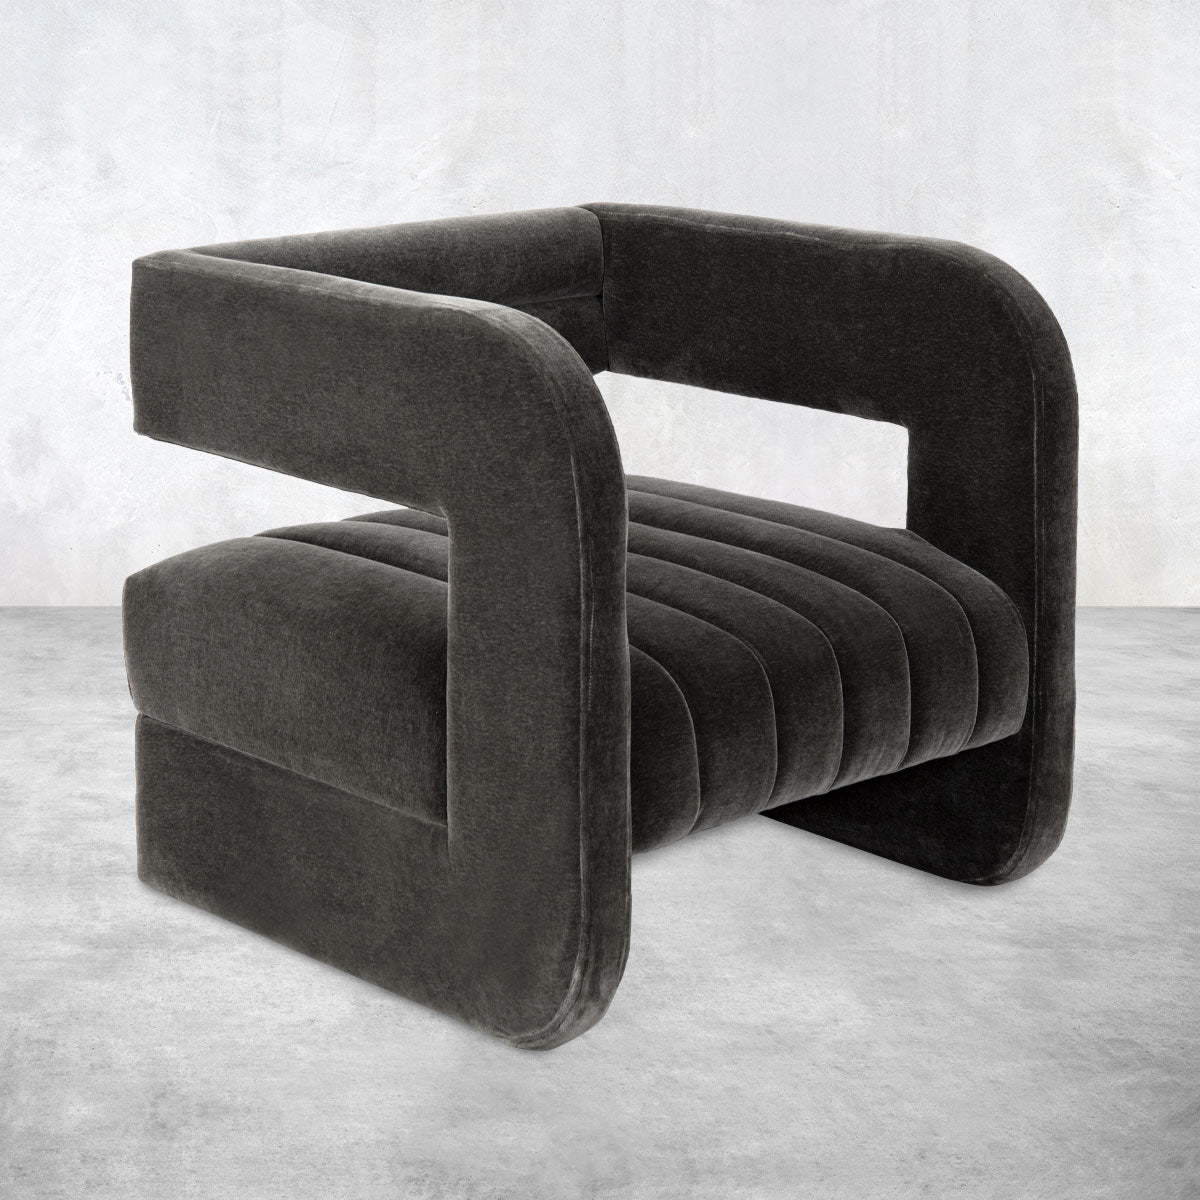 Ultra-modern occasional chair fully upholstered in black chenille with an open back and channel tufted cushion.